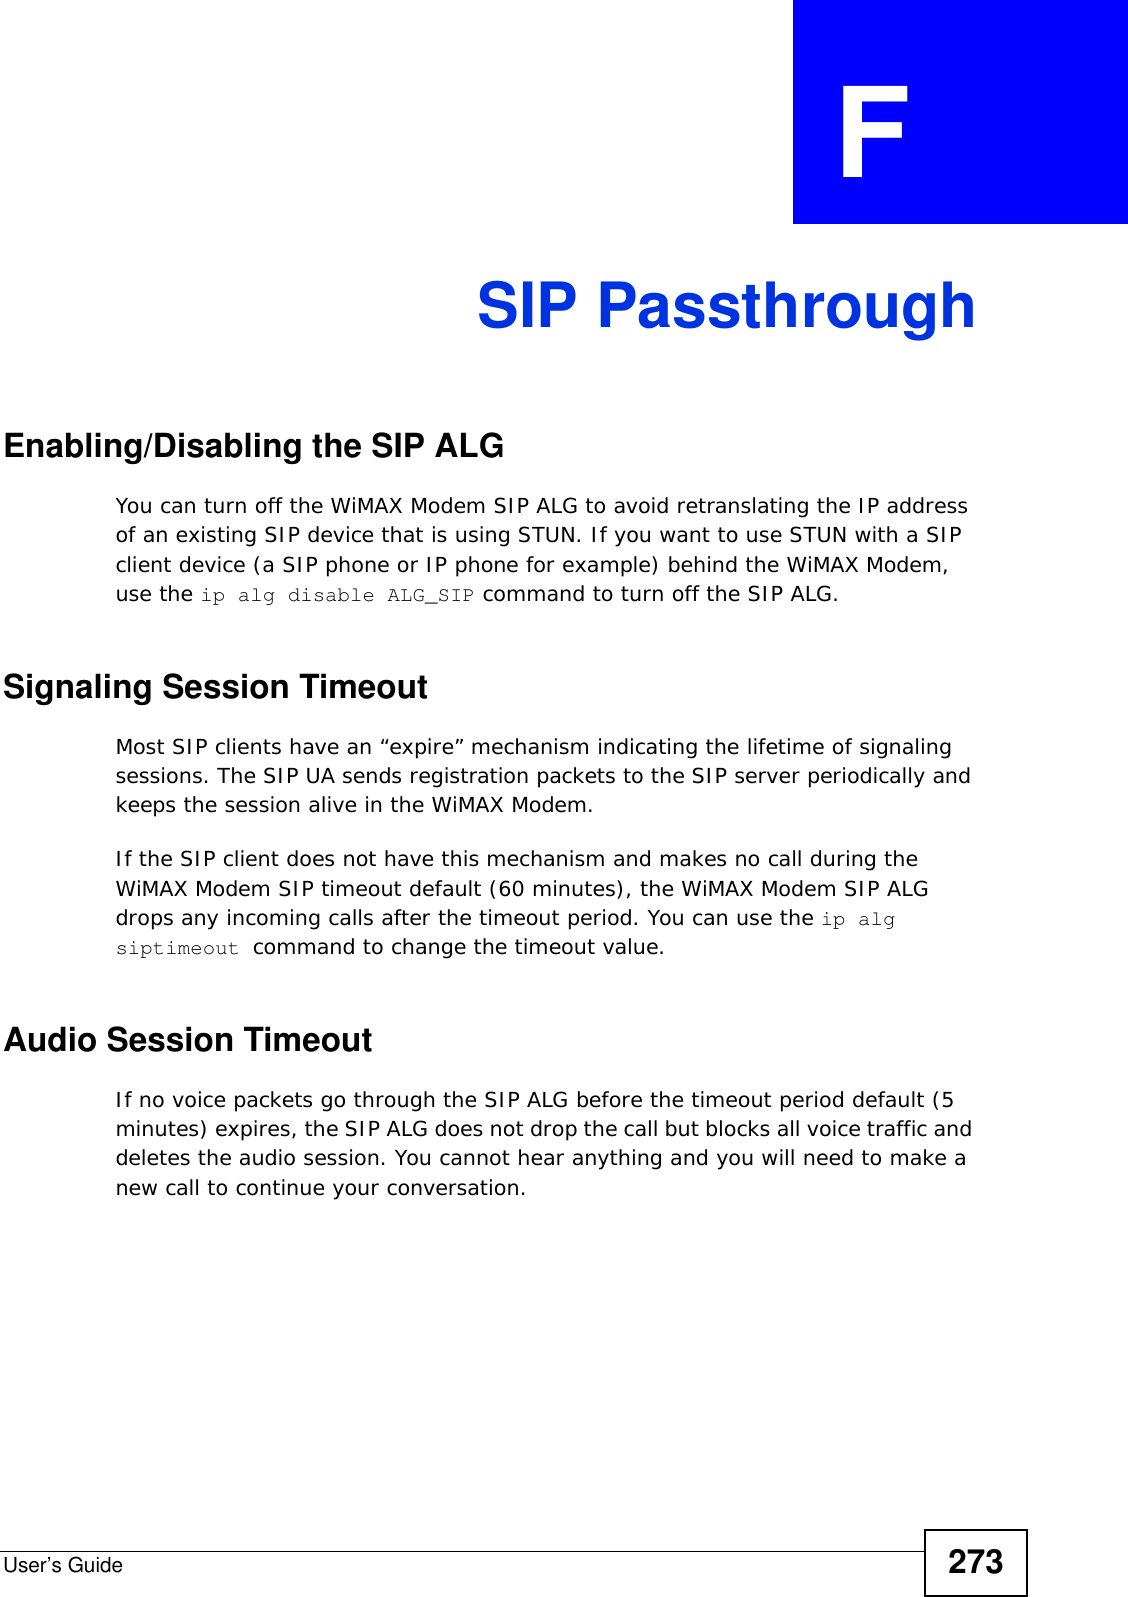 User’s Guide 273APPENDIX  F  SIP PassthroughEnabling/Disabling the SIP ALGYou can turn off the WiMAX Modem SIP ALG to avoid retranslating the IP address of an existing SIP device that is using STUN. If you want to use STUN with a SIP client device (a SIP phone or IP phone for example) behind the WiMAX Modem, use the ip alg disable ALG_SIP command to turn off the SIP ALG.Signaling Session TimeoutMost SIP clients have an “expire” mechanism indicating the lifetime of signaling sessions. The SIP UA sends registration packets to the SIP server periodically and keeps the session alive in the WiMAX Modem. If the SIP client does not have this mechanism and makes no call during the WiMAX Modem SIP timeout default (60 minutes), the WiMAX Modem SIP ALG drops any incoming calls after the timeout period. You can use the ip alg siptimeout command to change the timeout value.Audio Session TimeoutIf no voice packets go through the SIP ALG before the timeout period default (5 minutes) expires, the SIP ALG does not drop the call but blocks all voice traffic and deletes the audio session. You cannot hear anything and you will need to make a new call to continue your conversation.